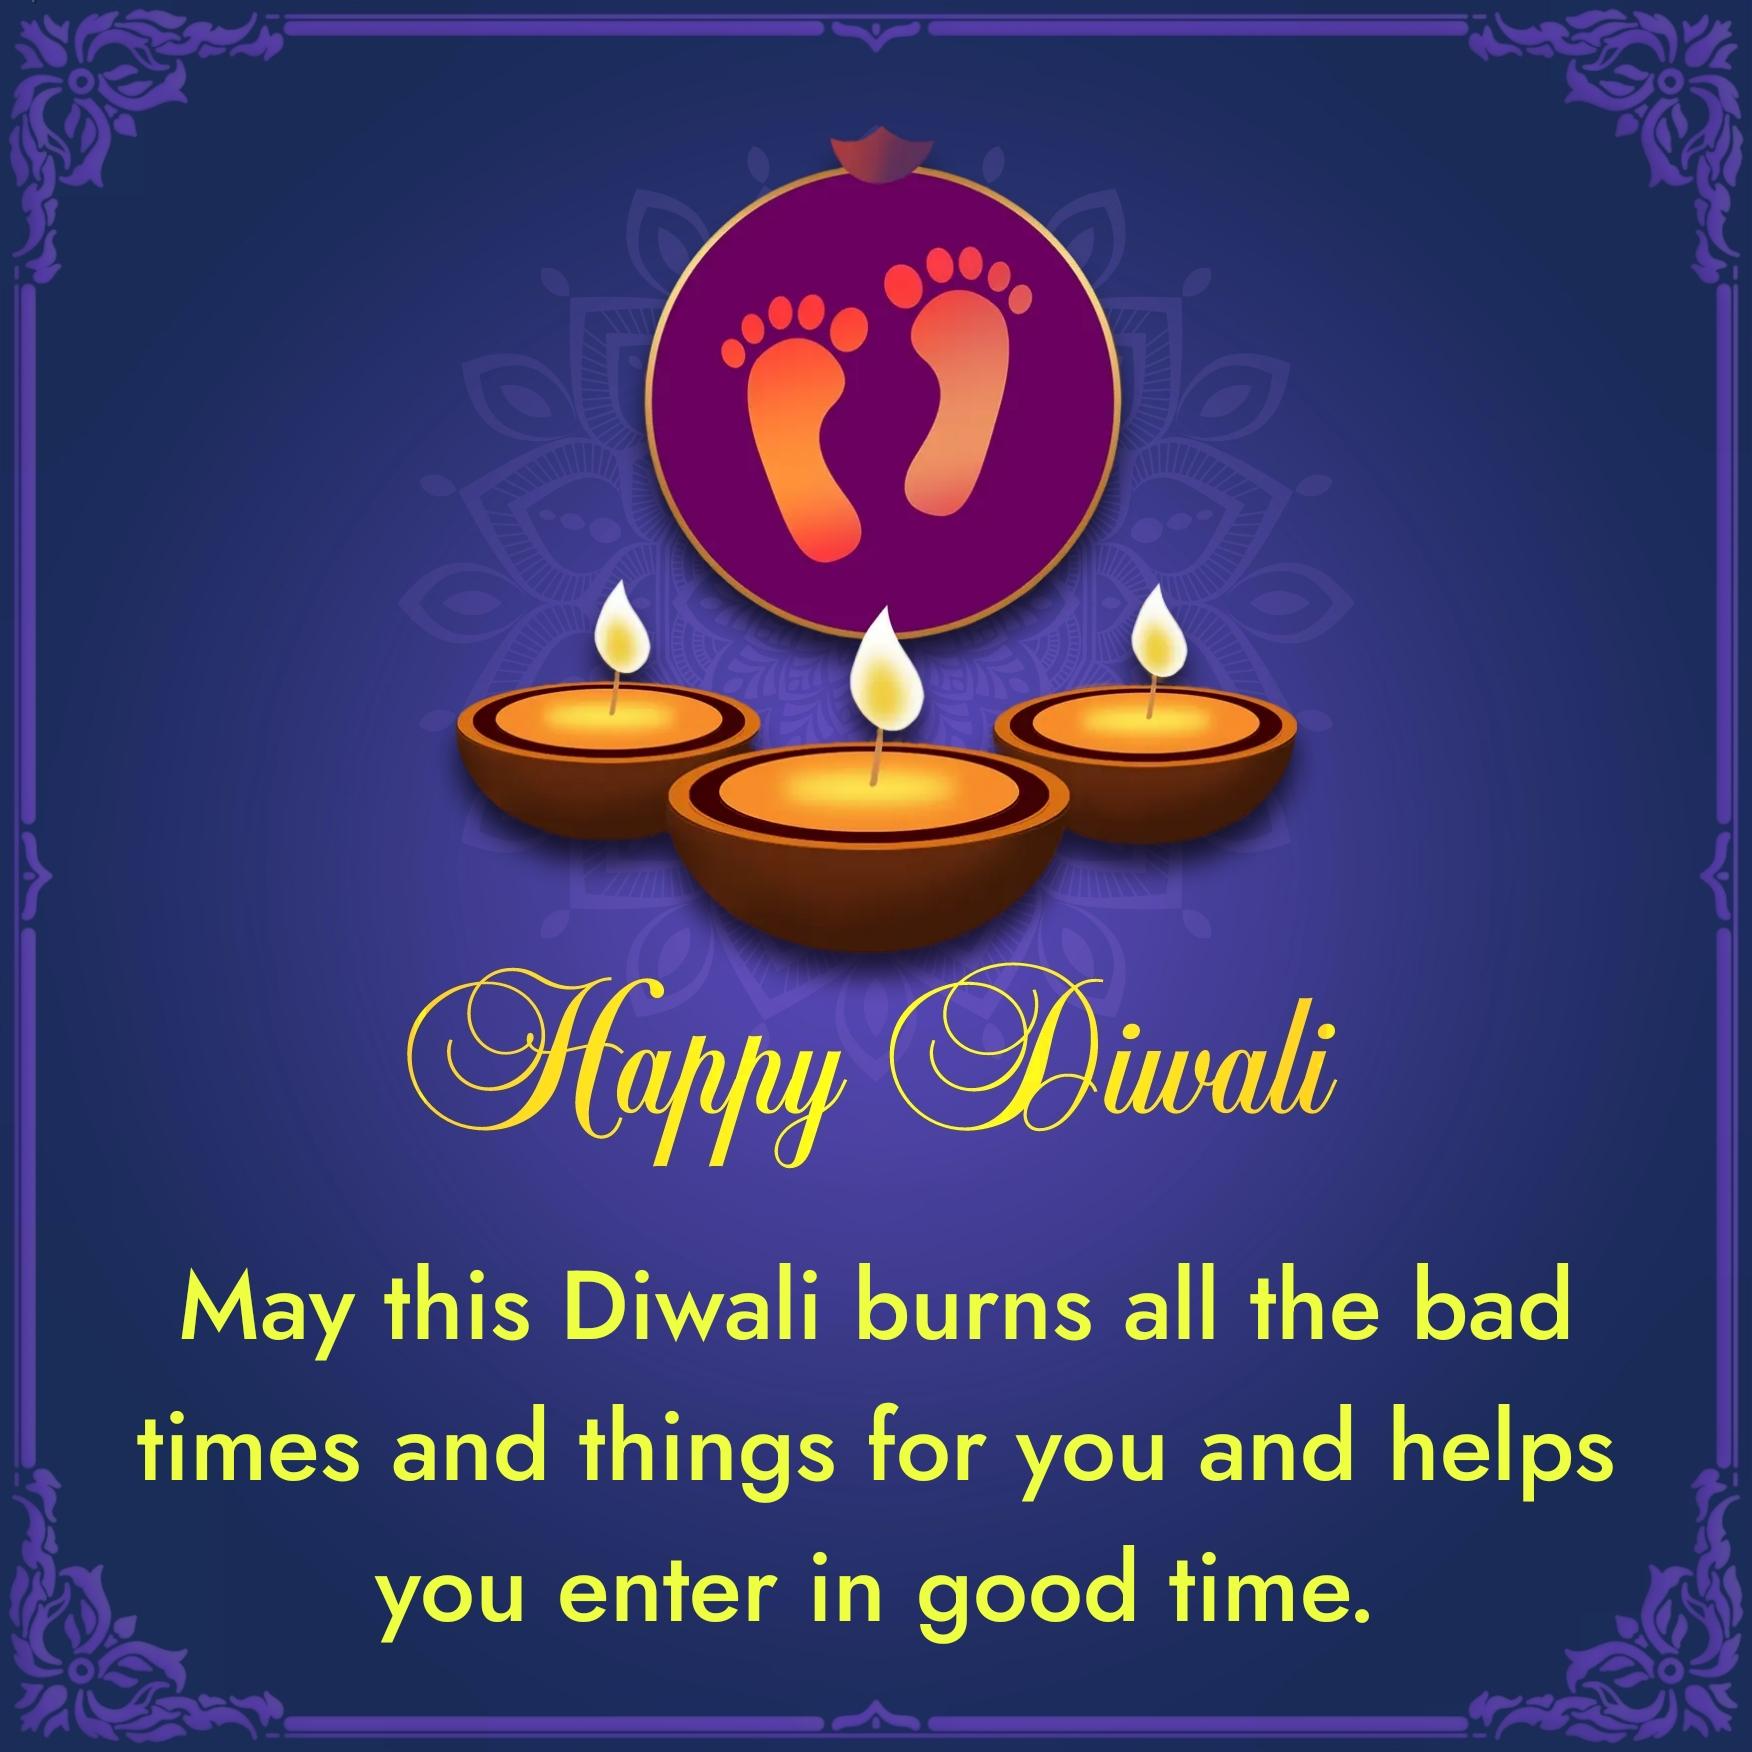 May this Diwali burns all the bad times and things for you